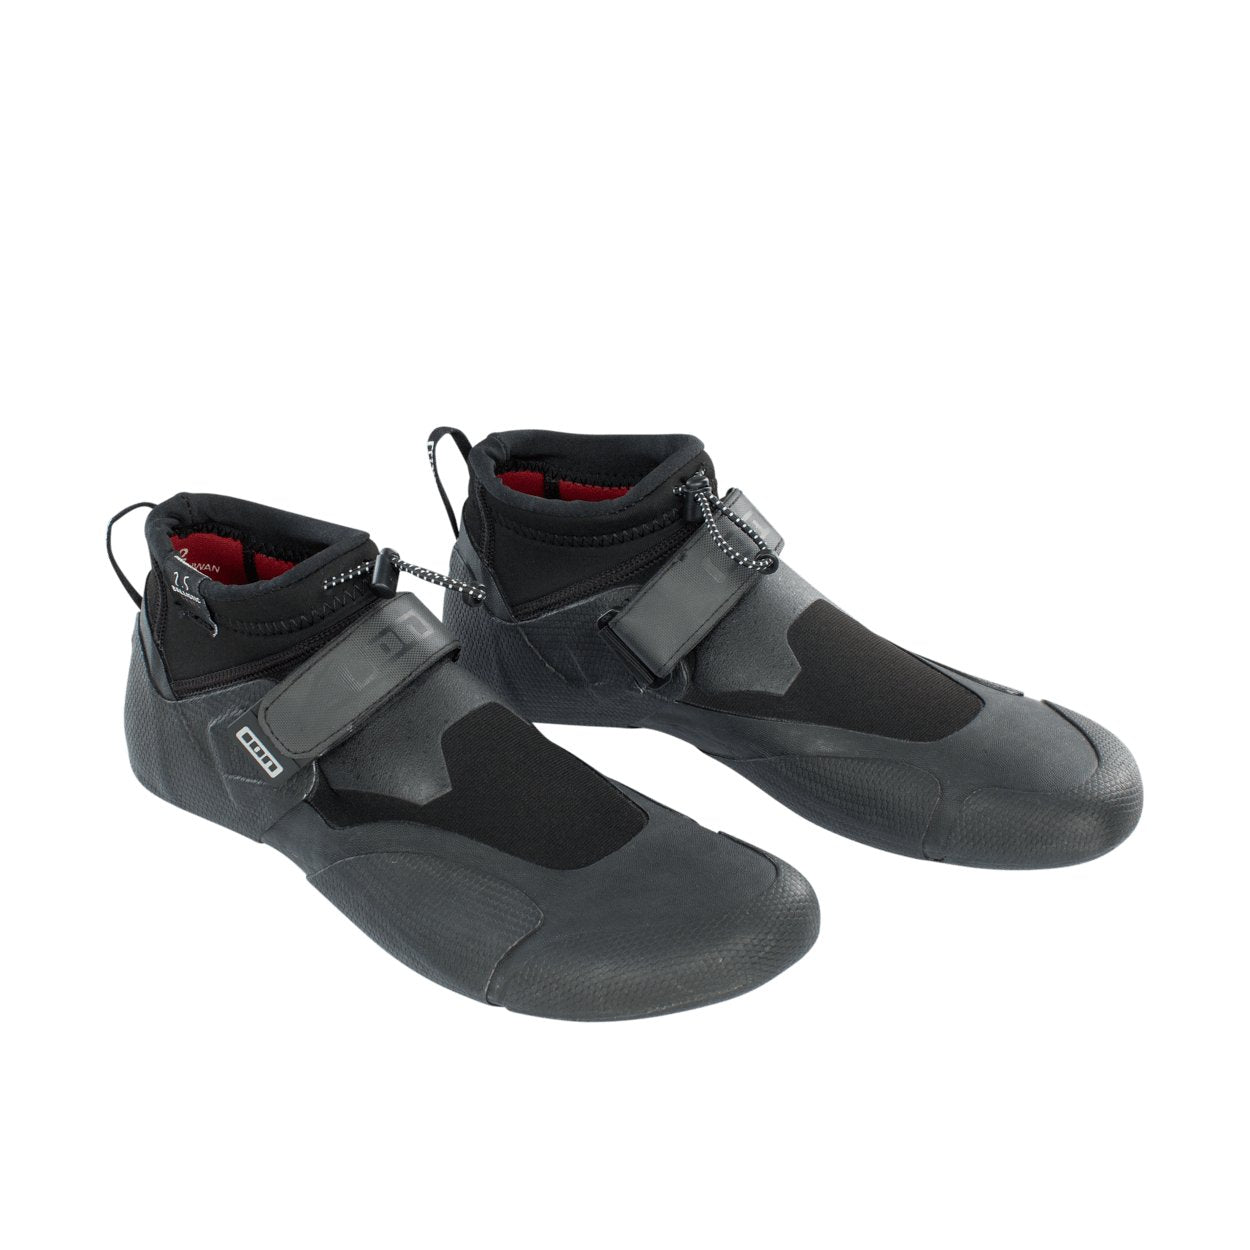 ION Ballistic Shoes 2.5 Round Toe 2022 - Worthing Watersports - 9008415883820 - Footwear - ION Water